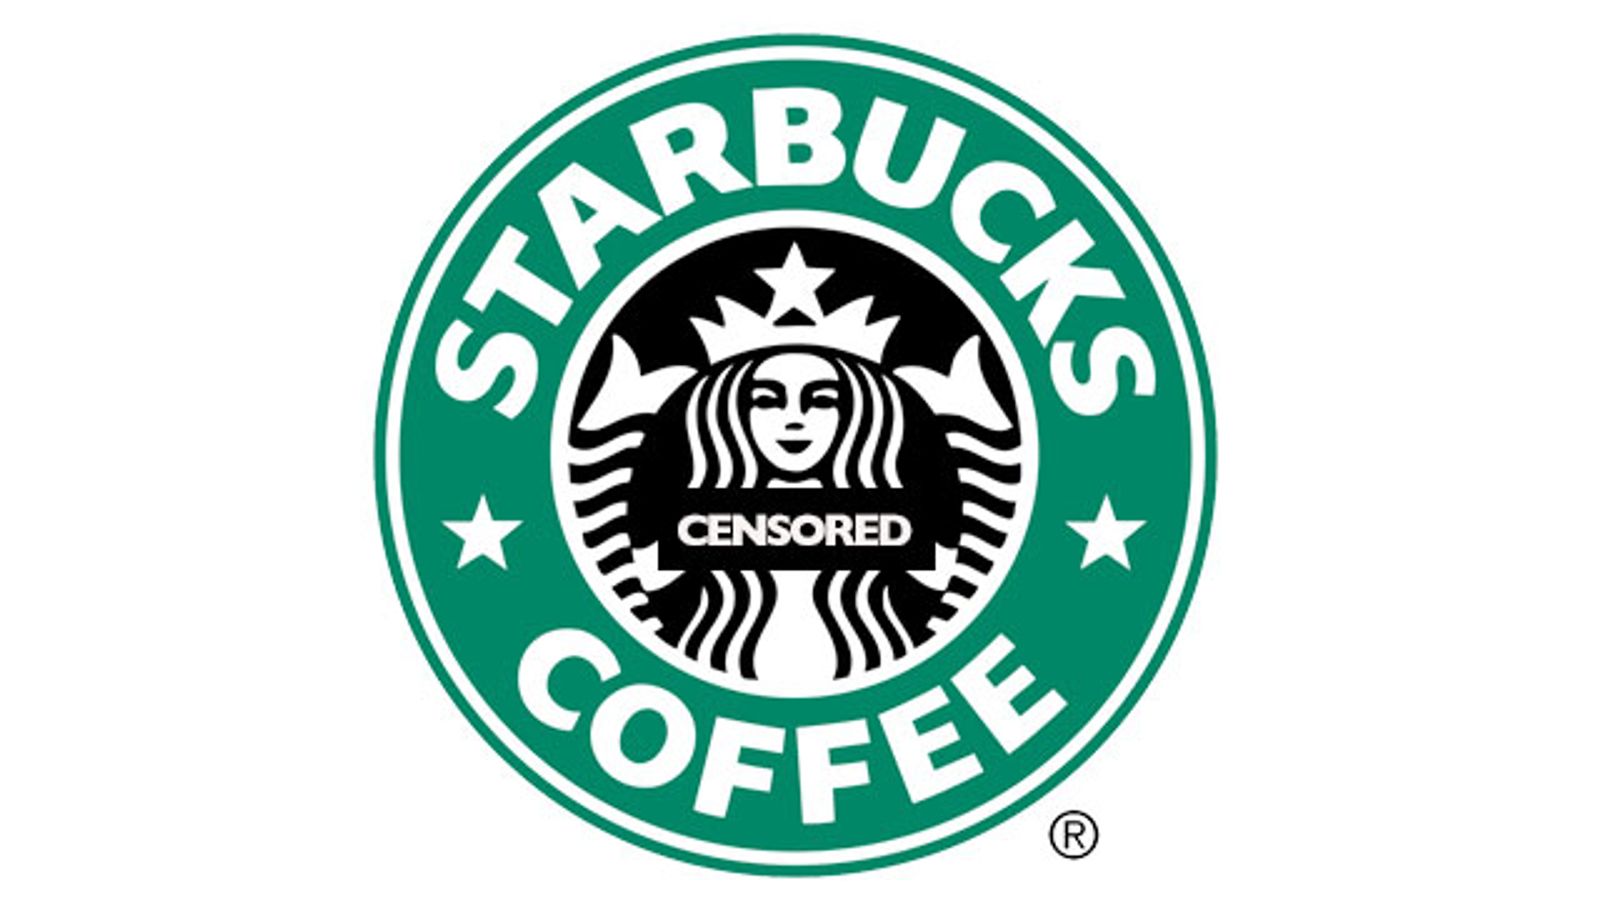 Starbucks Gives in to Enough Is Enough's Wi-Fi Filtering